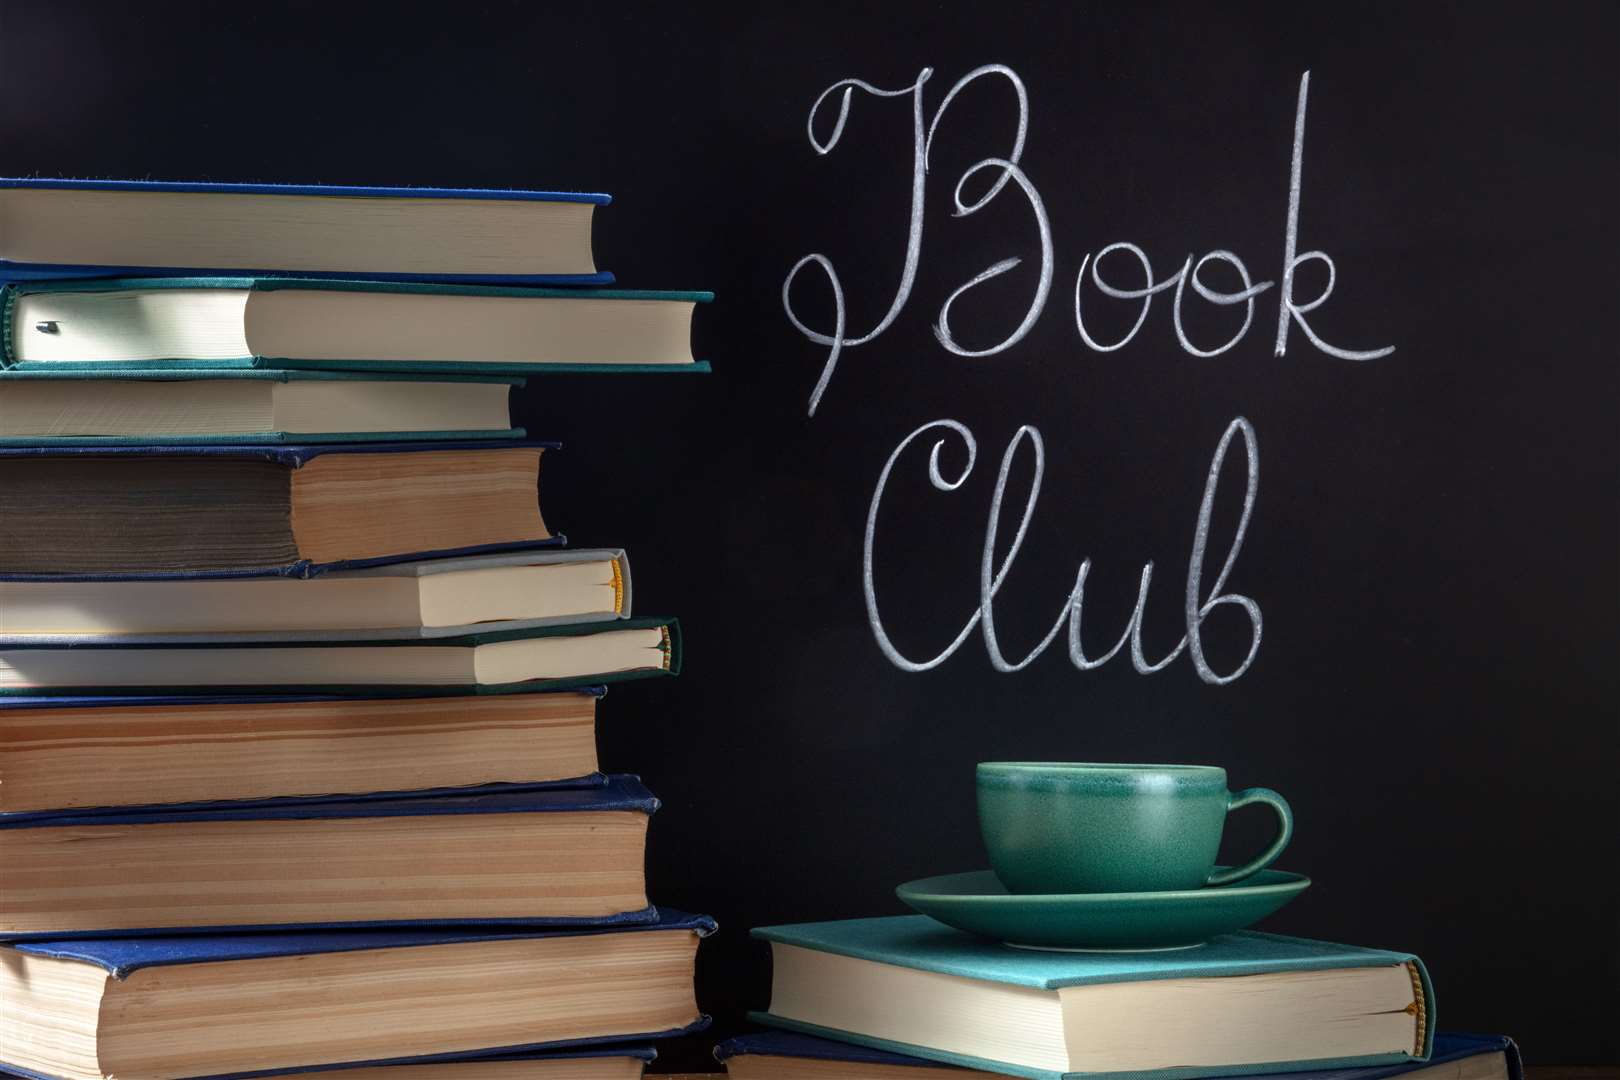 The book club has a provisional start date of July 25.